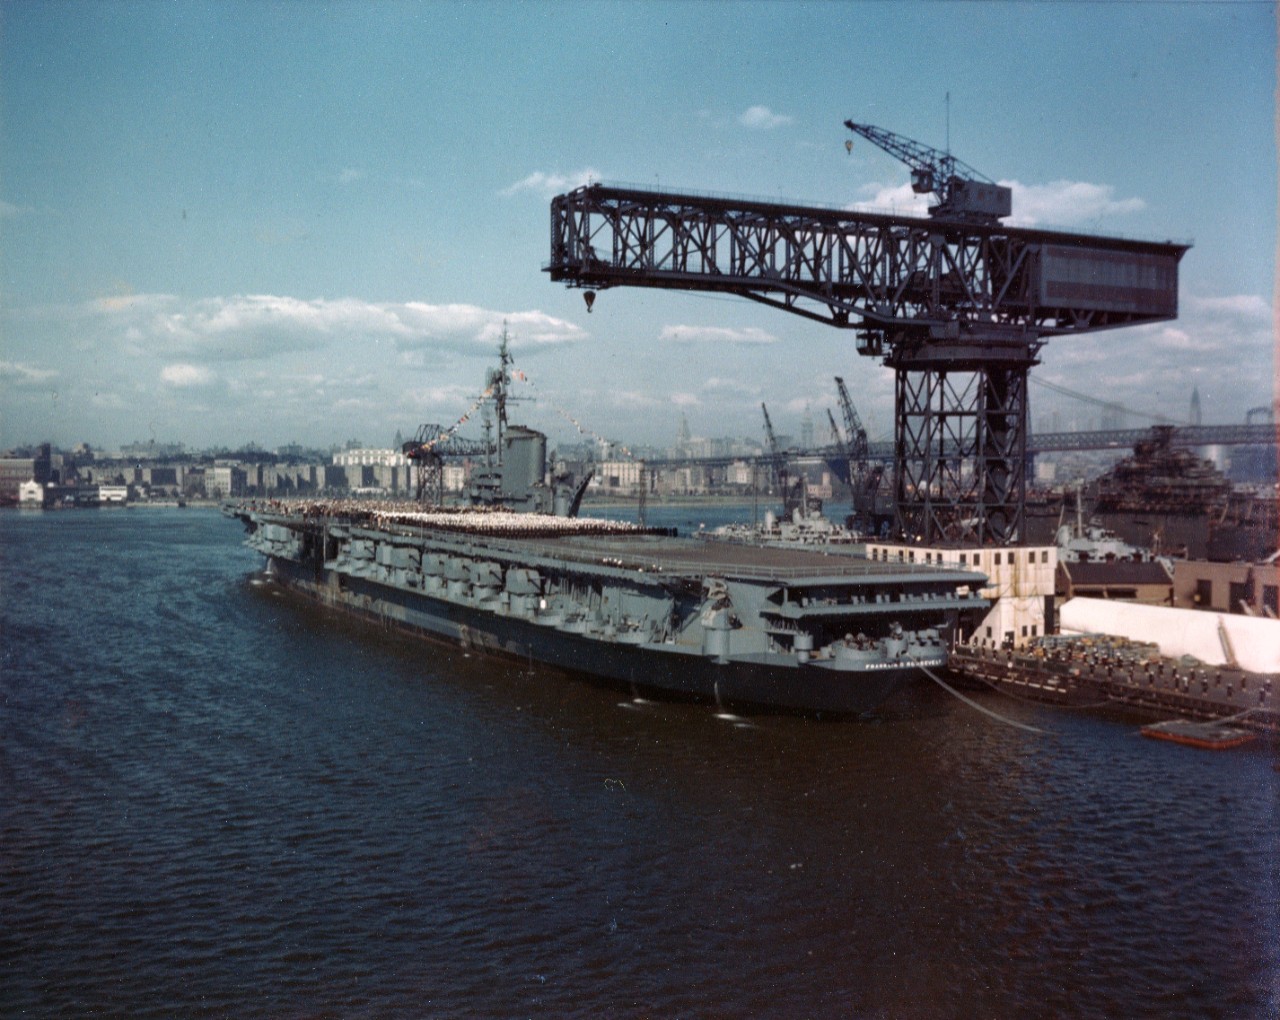 USS Franklin D. Roosevelt (CVB-42) commissioning ceremonies, at the New York Navy Yard, on Navy Day, 27 October 1945.